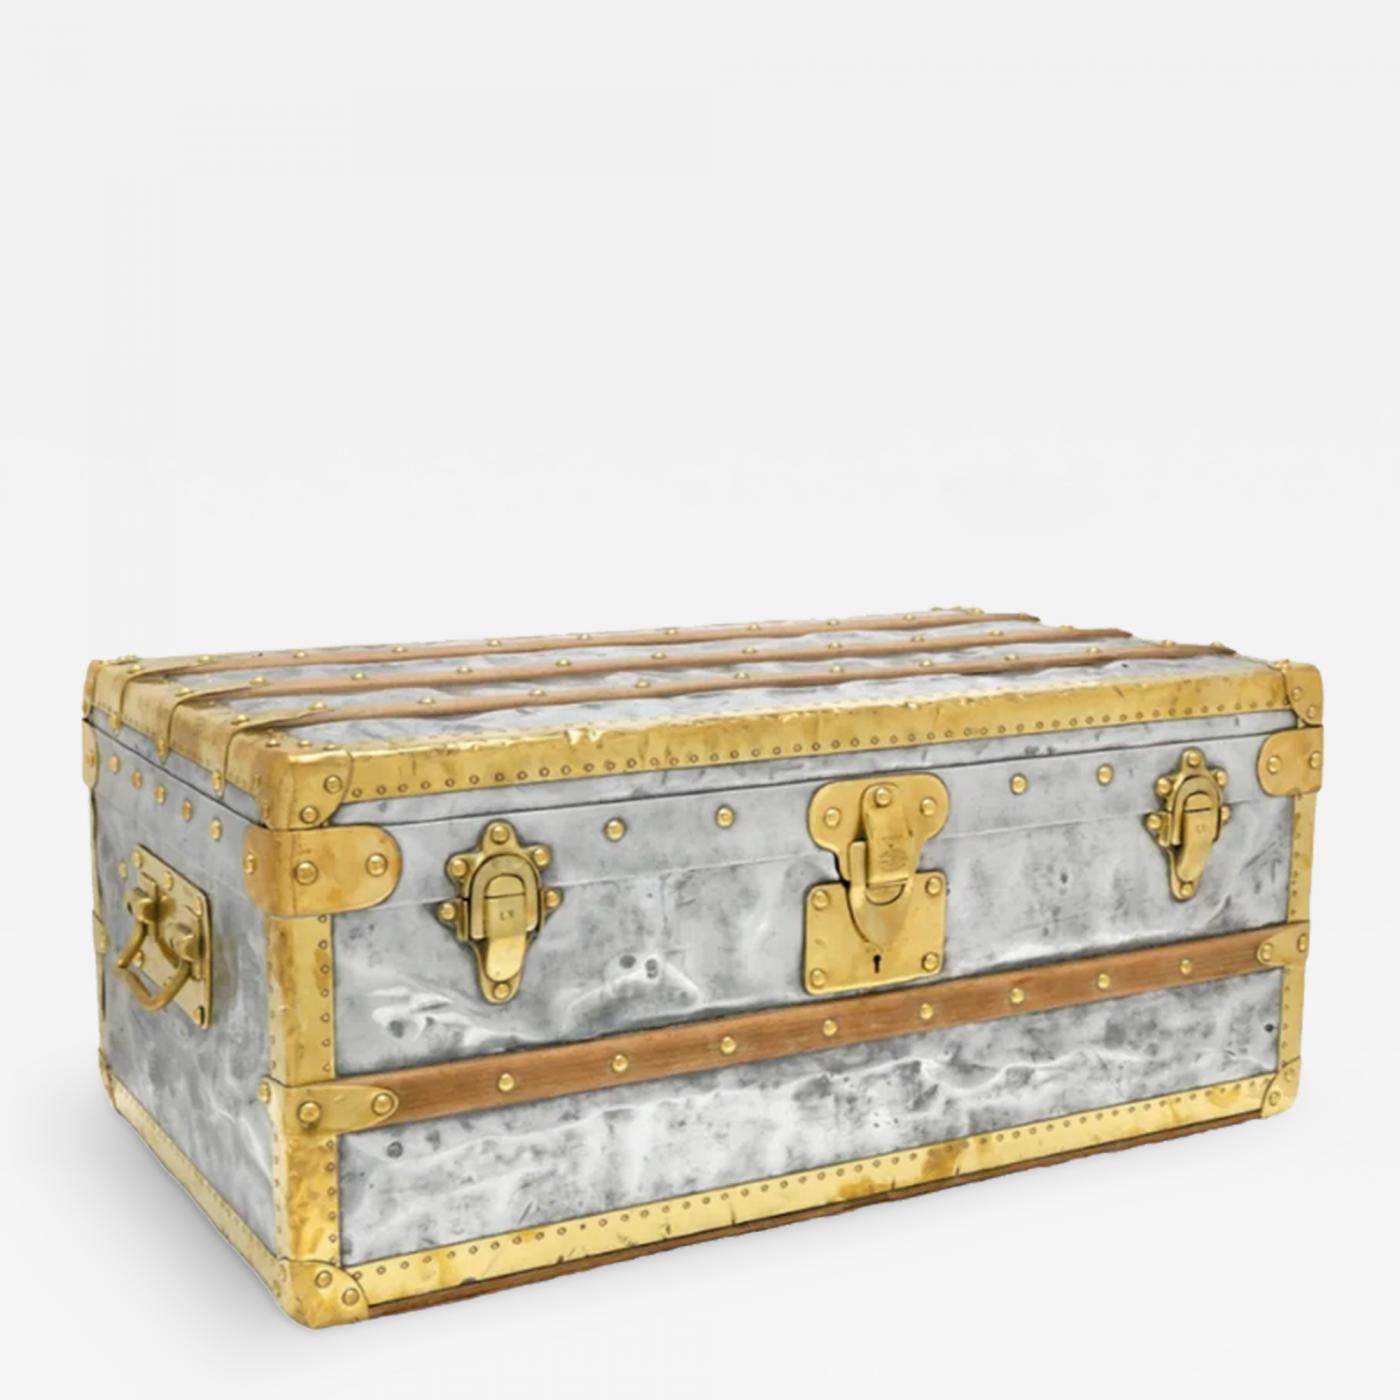 Extremely rare all-zinc cabin trunk by Louis Vuitton, c. 1890s, 1stdibs.com